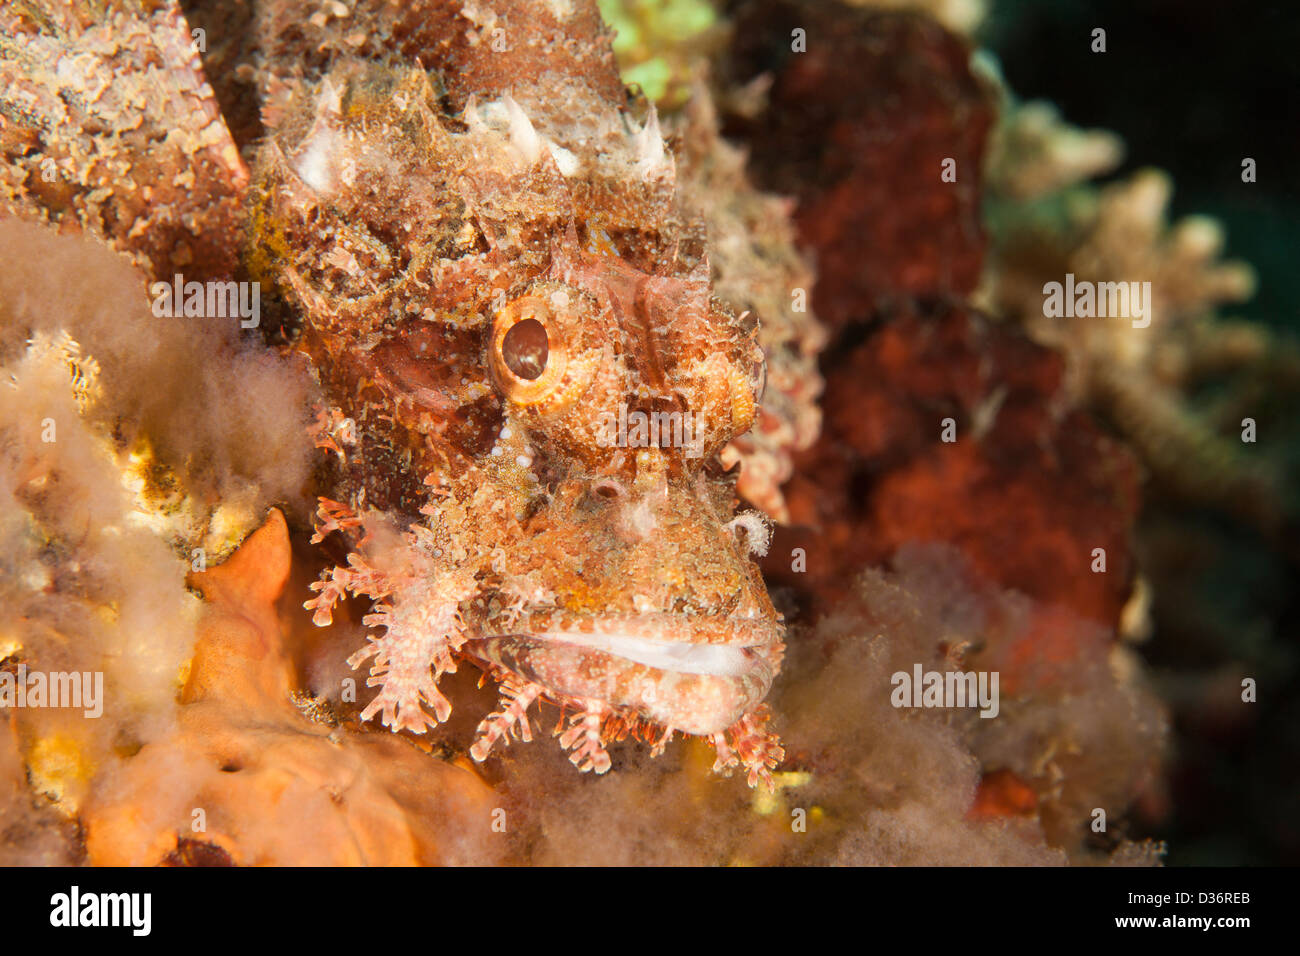 Poss's Scorpionfish (Scorpaenopsis possi), on a tropical coral reef in Bali, Indonesia Stock Photo